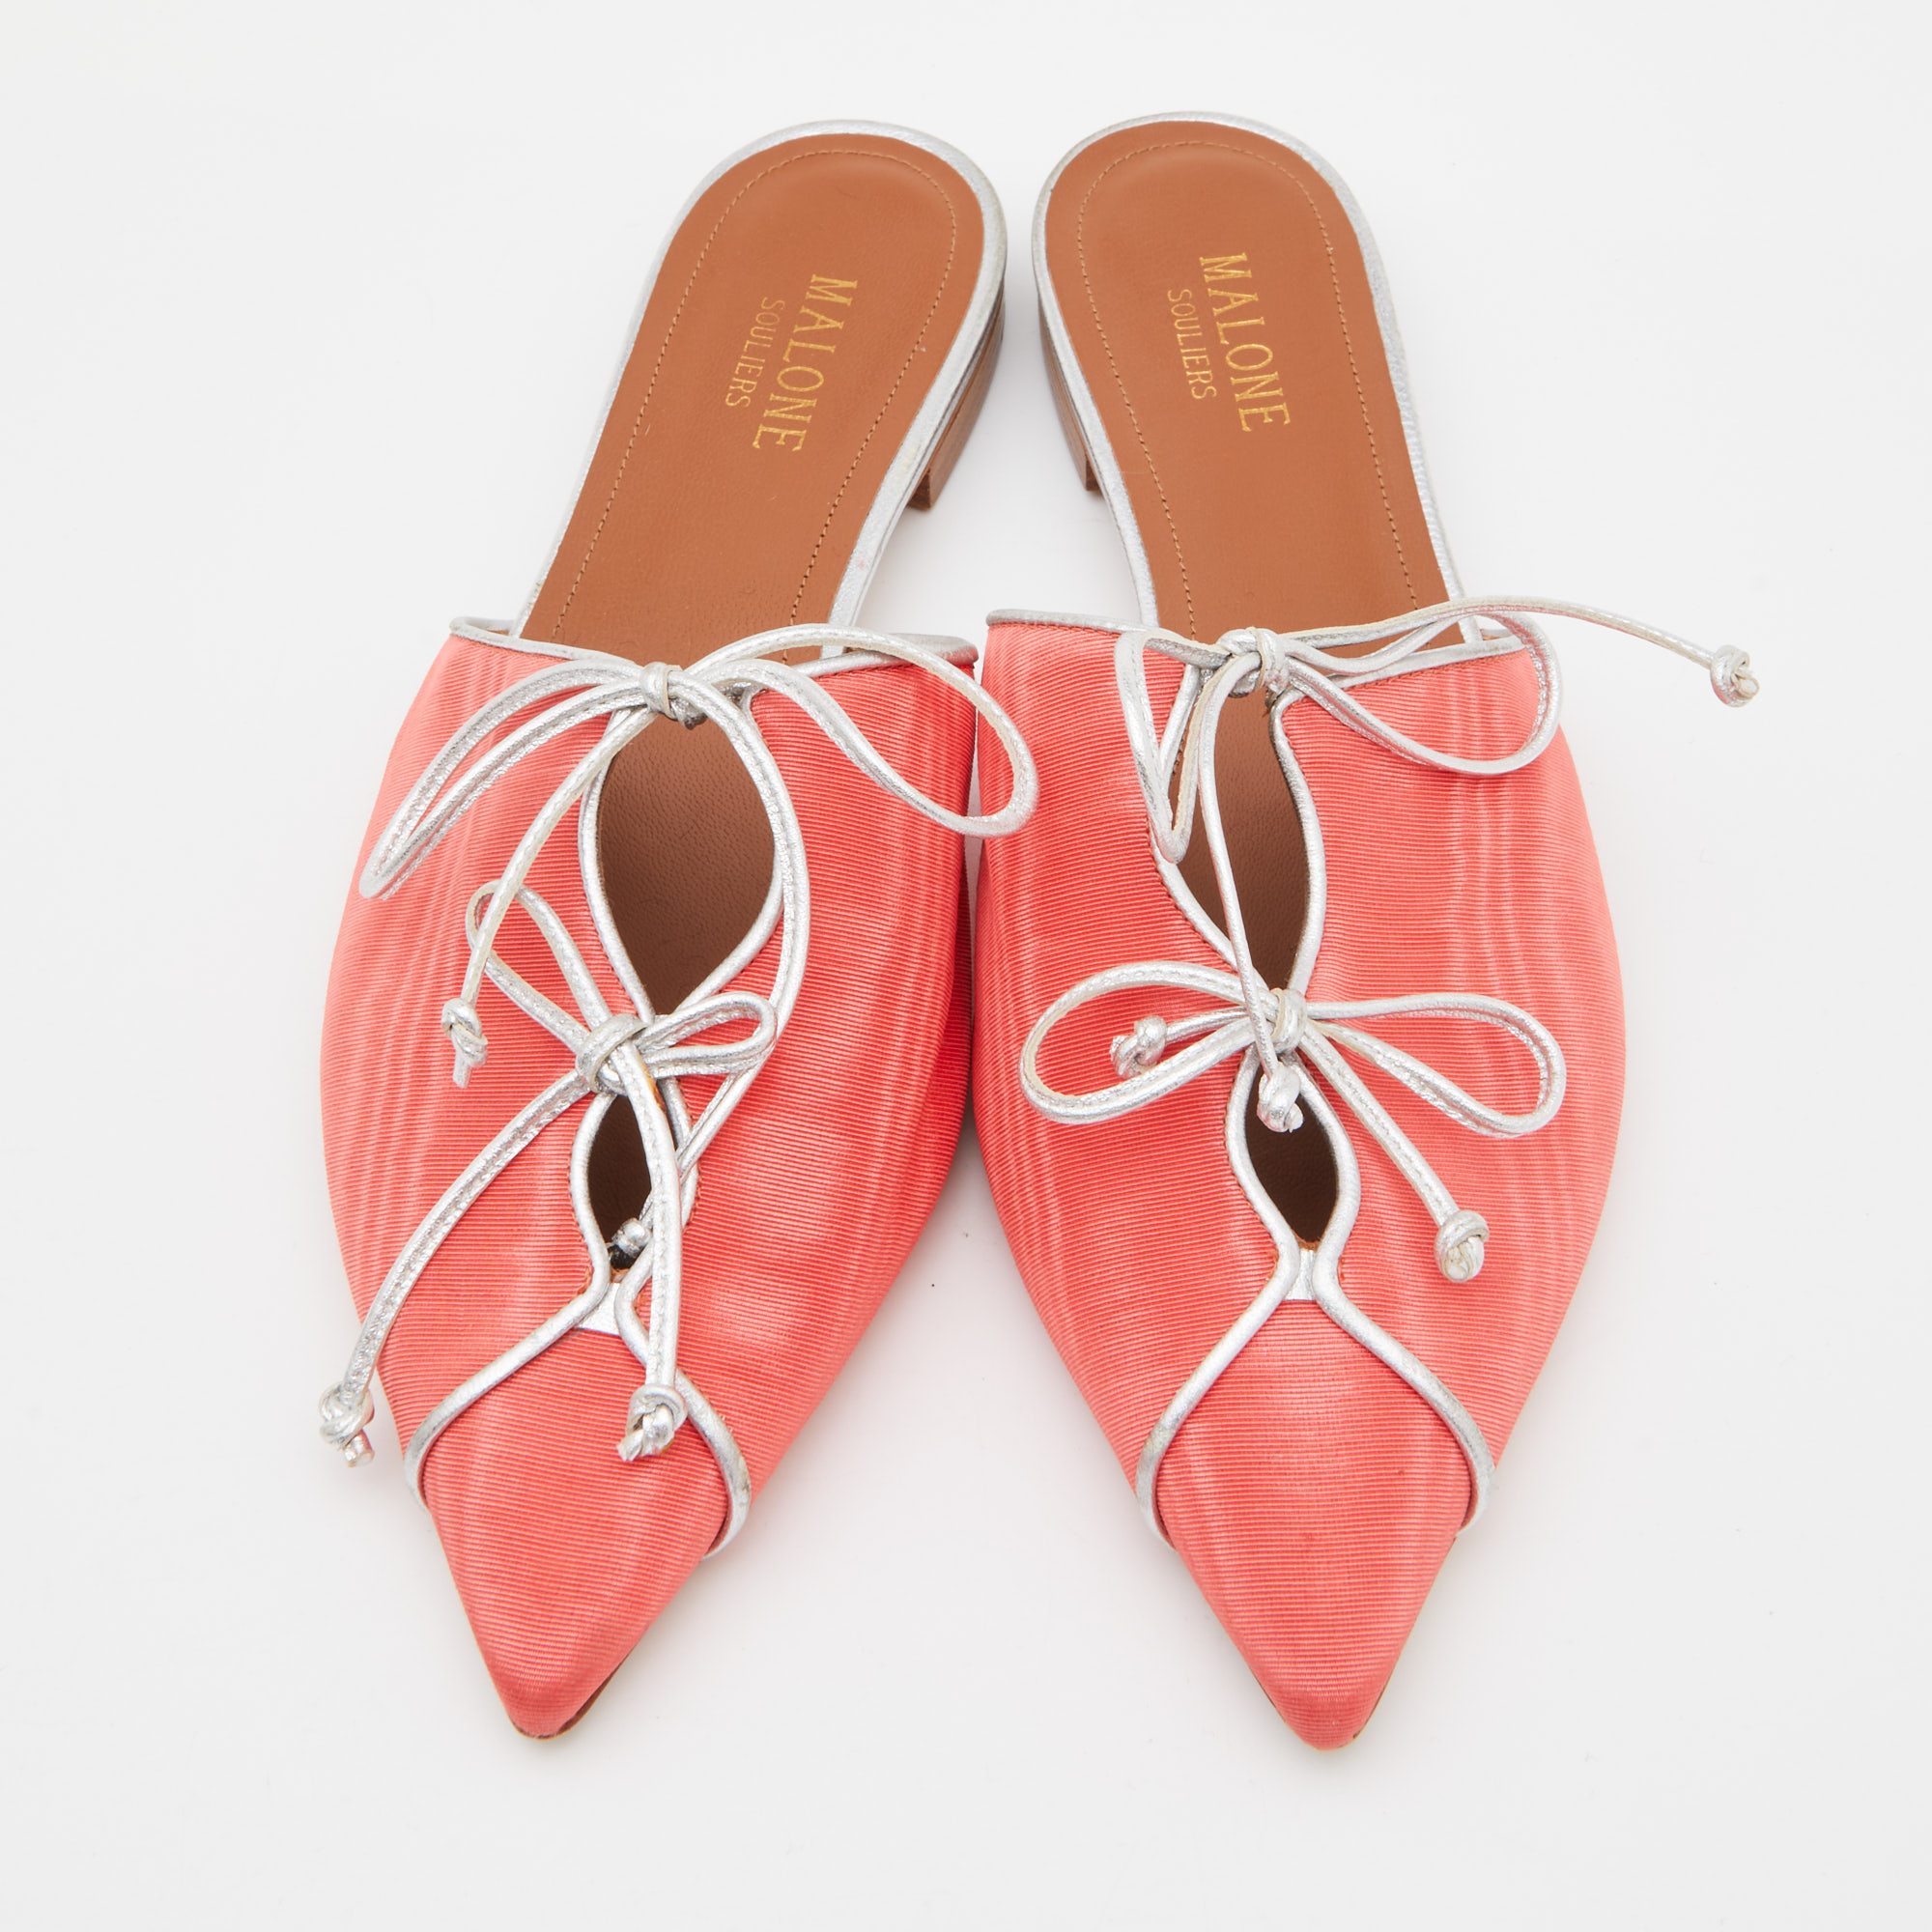 Malone Souliers Orange/Silver Canvas Annie Lace Up Flat Mules Size 38.5